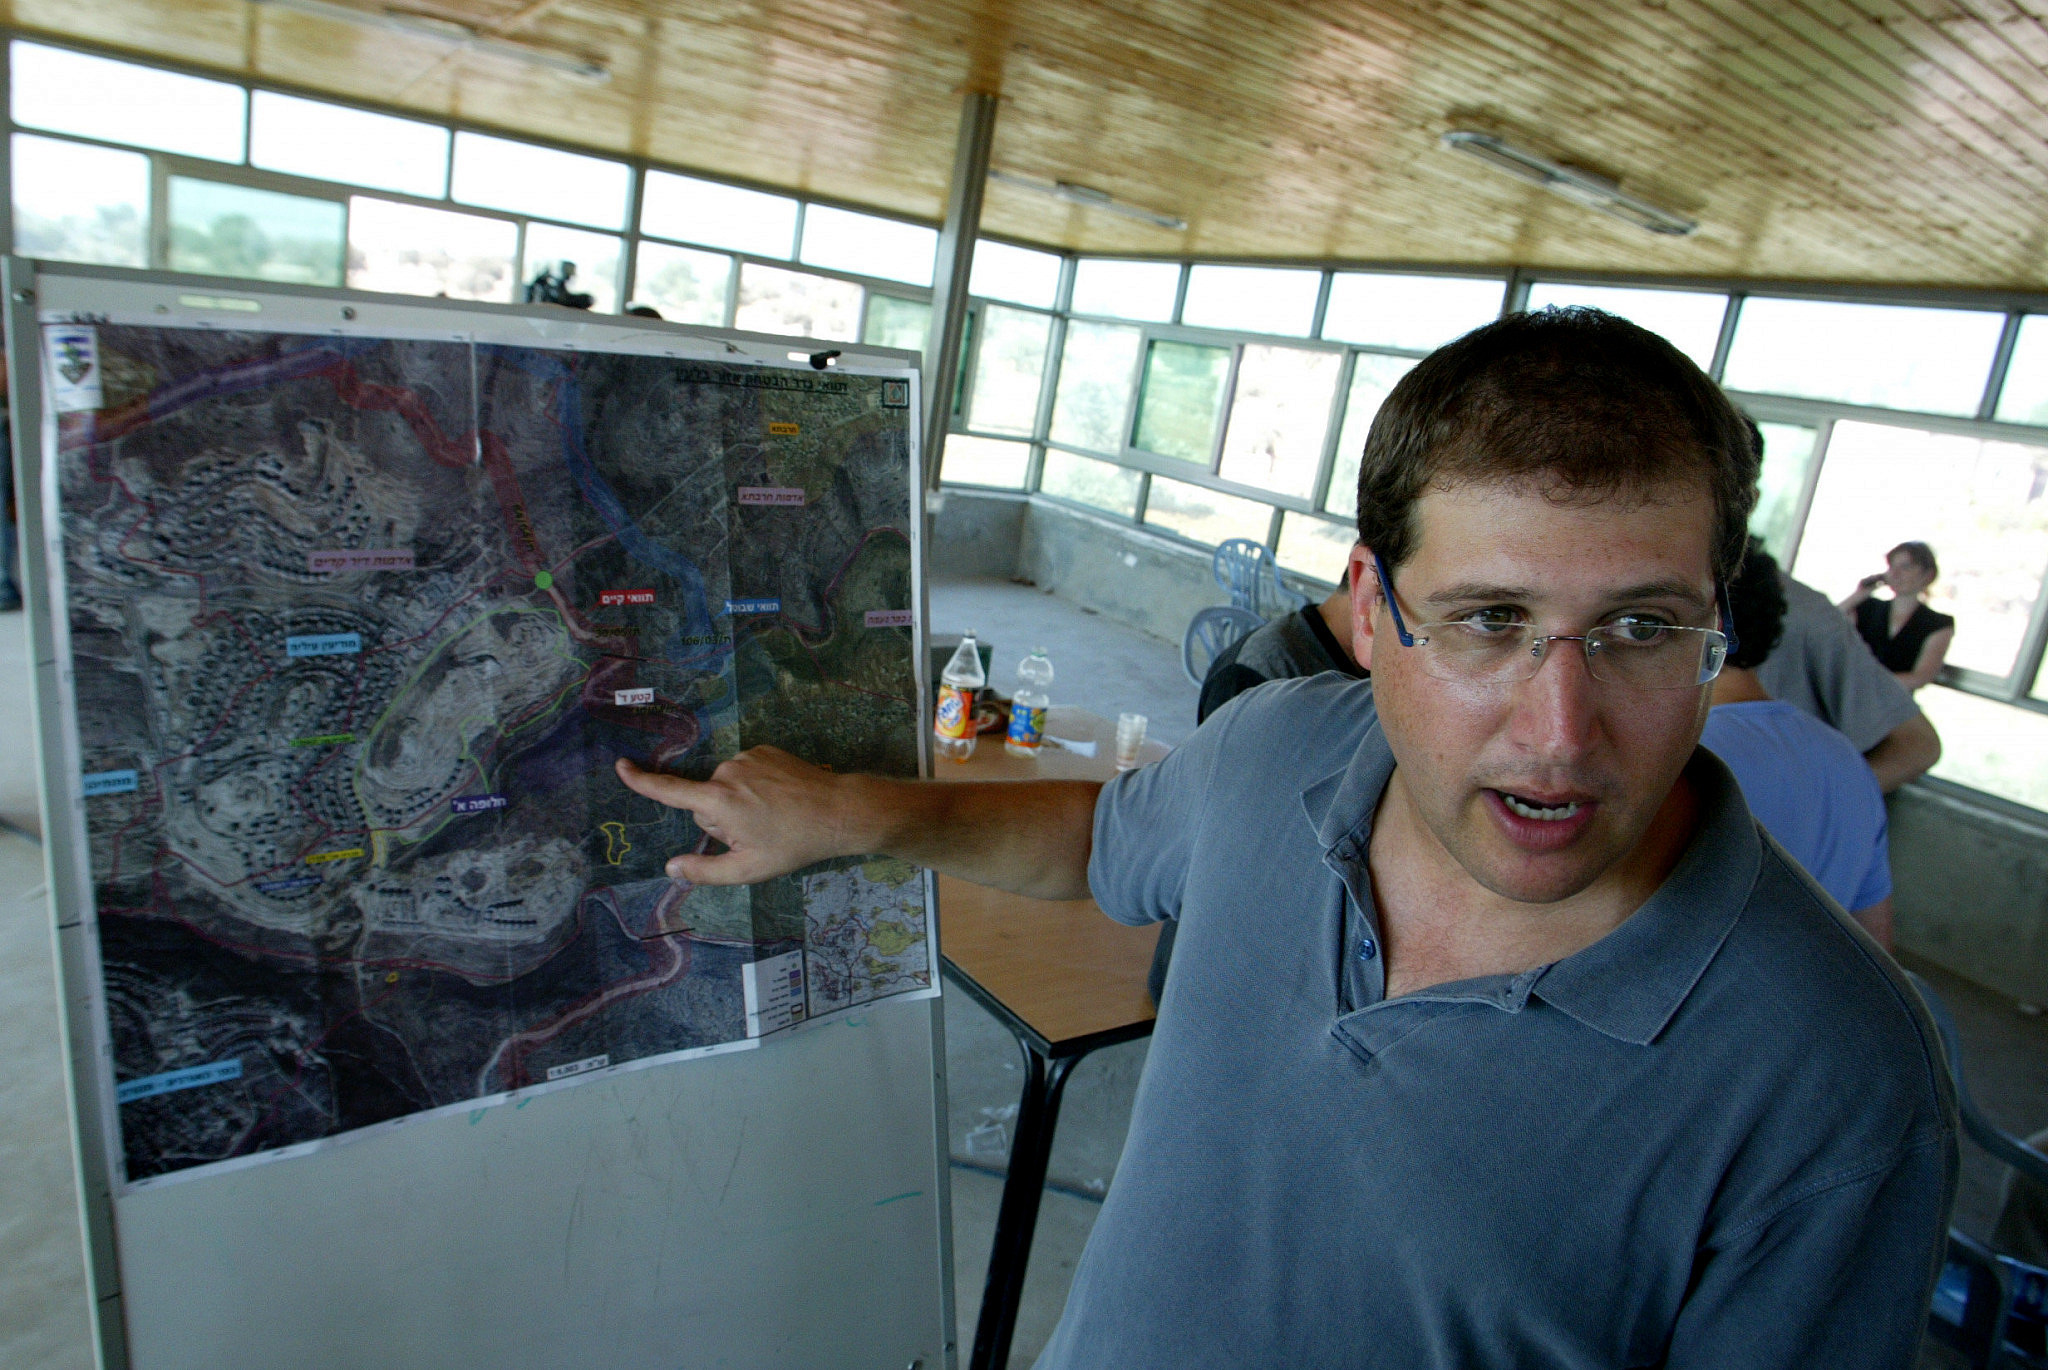 Israeli attorney Michael Sfard shows a map of the separation barrier following the decision by the Israeli Supreme Court to reroute its construction in the occupied West Bank village of Bil'in, September 4, 2007. (Olivier Fitoussi/Flash90)